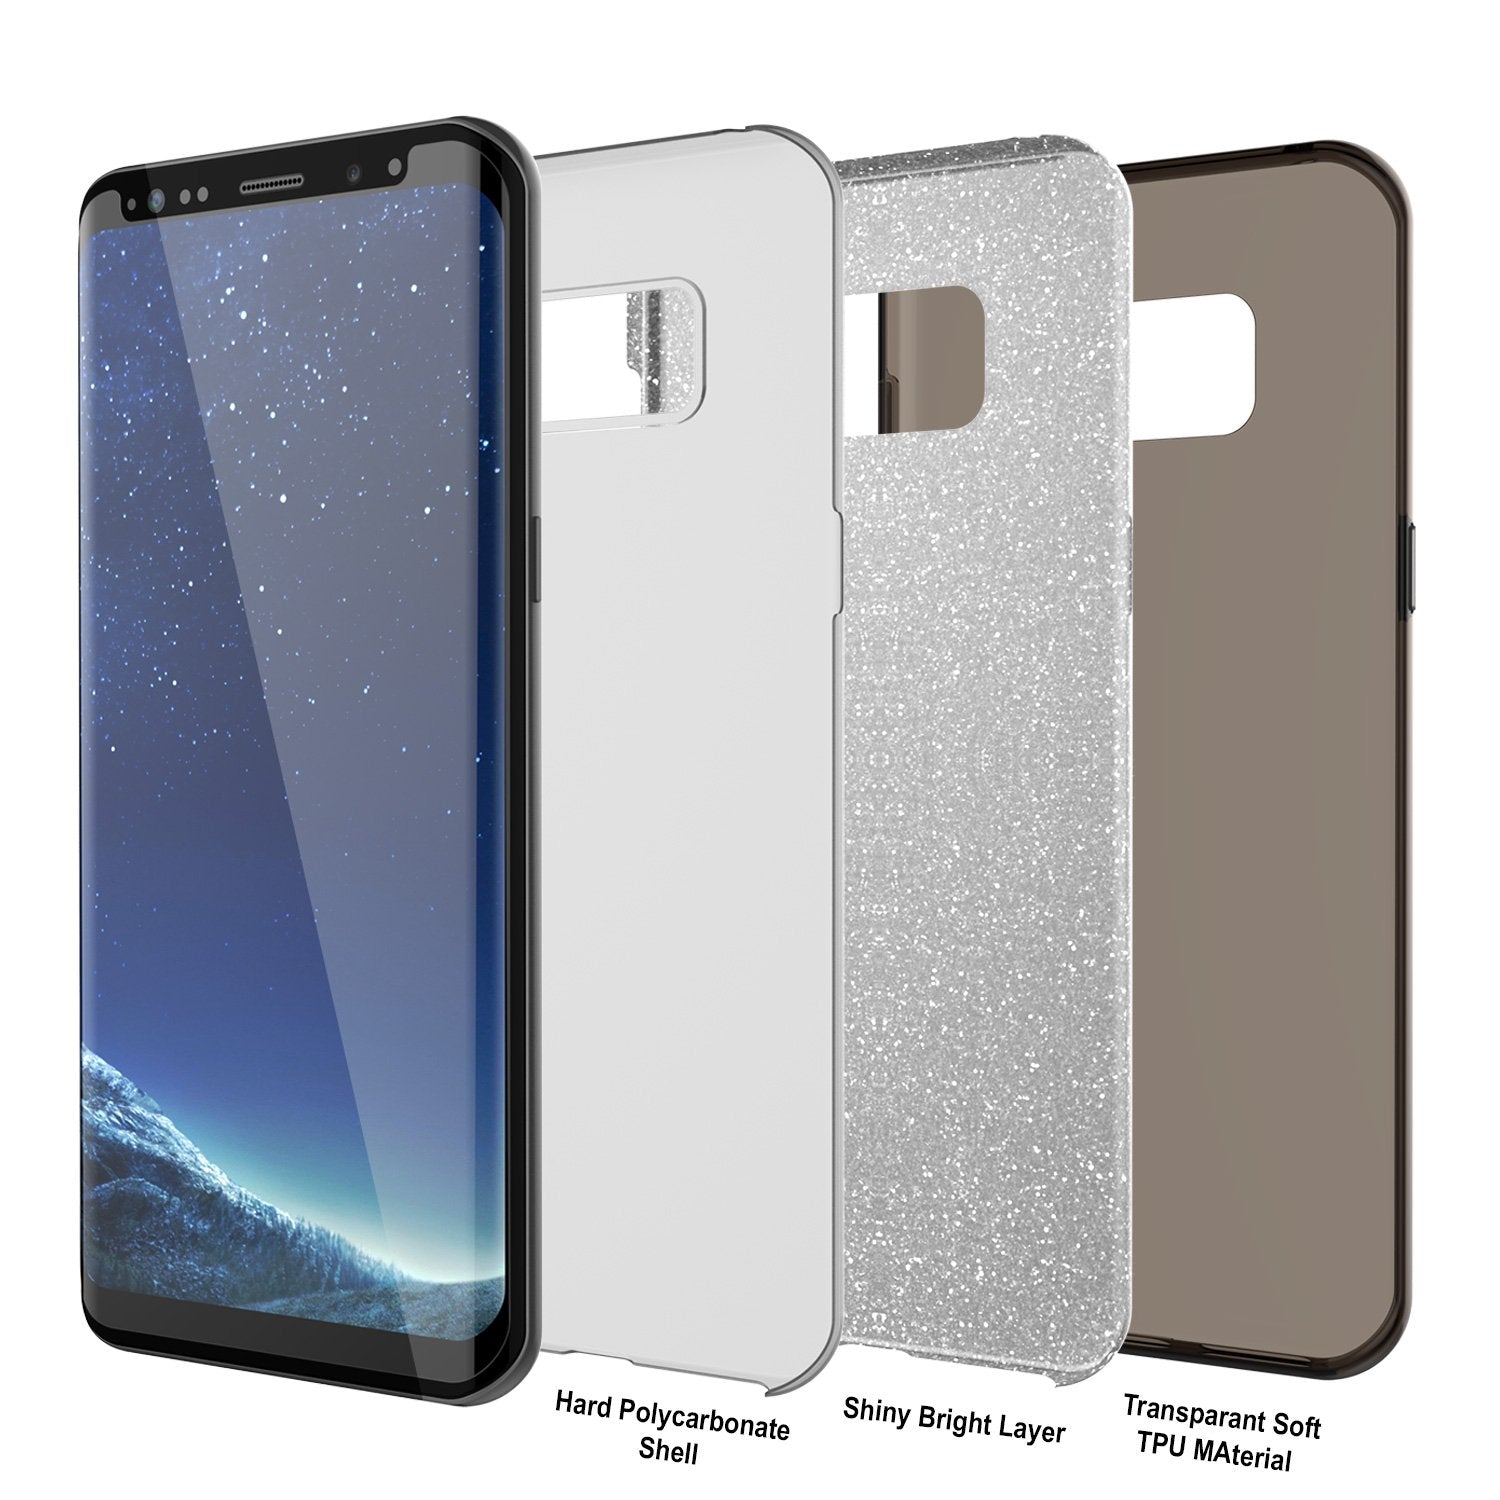 Galaxy S8 Case, Punkcase Galactic 2.0 Series Ultra Slim Protective Armor Cover [Black/grey]